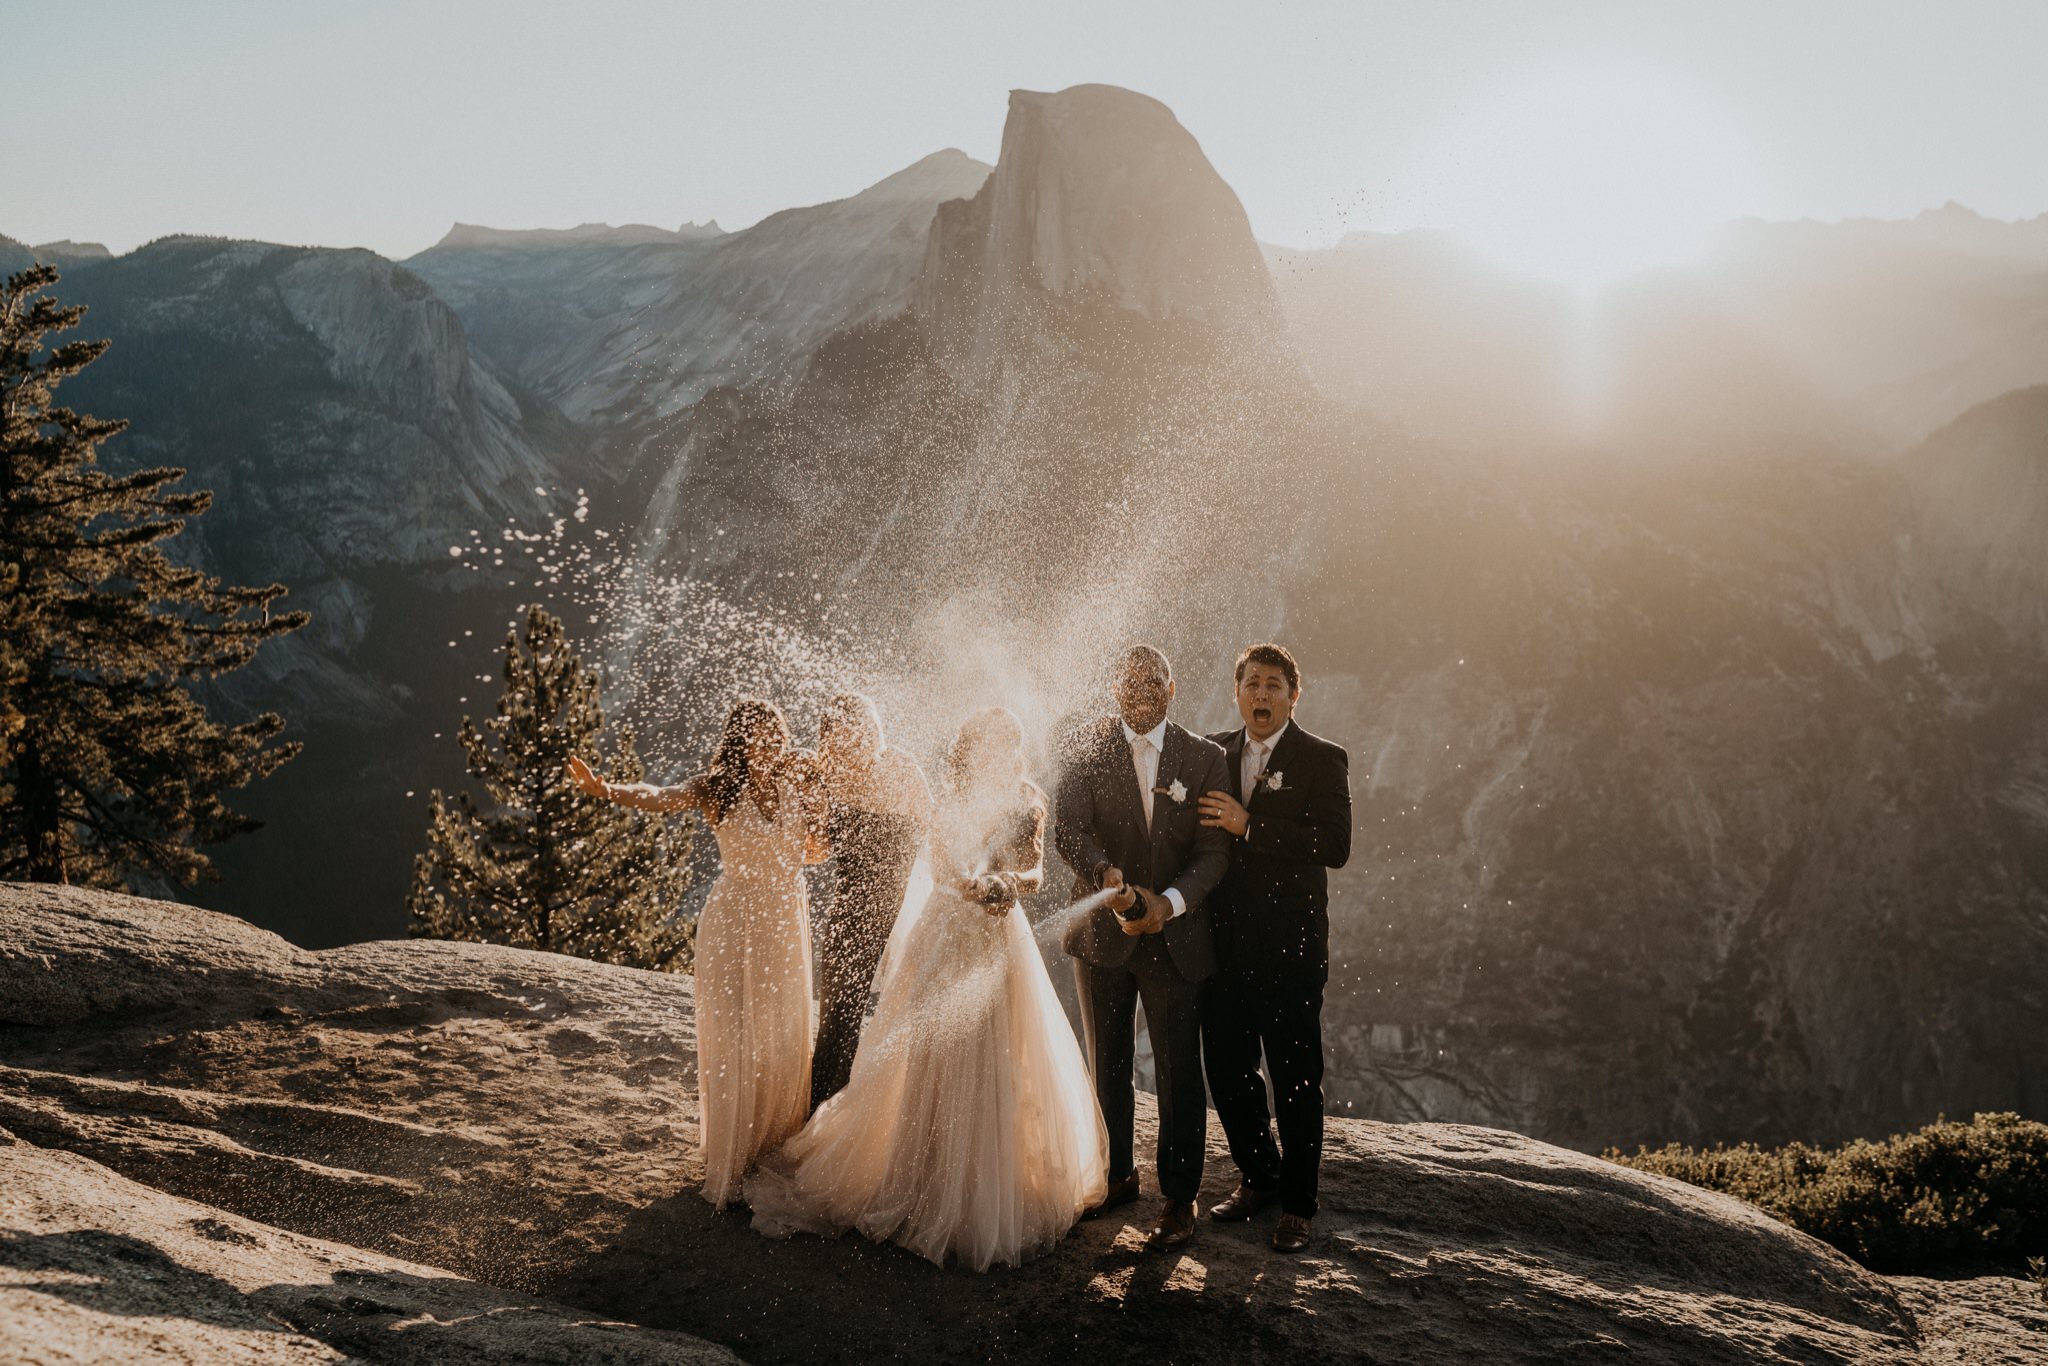 Intimate elopement with friends and family members | Yosemite National Park elopement and wedding photos at Glacier Point during sunrise with view of Half Dome